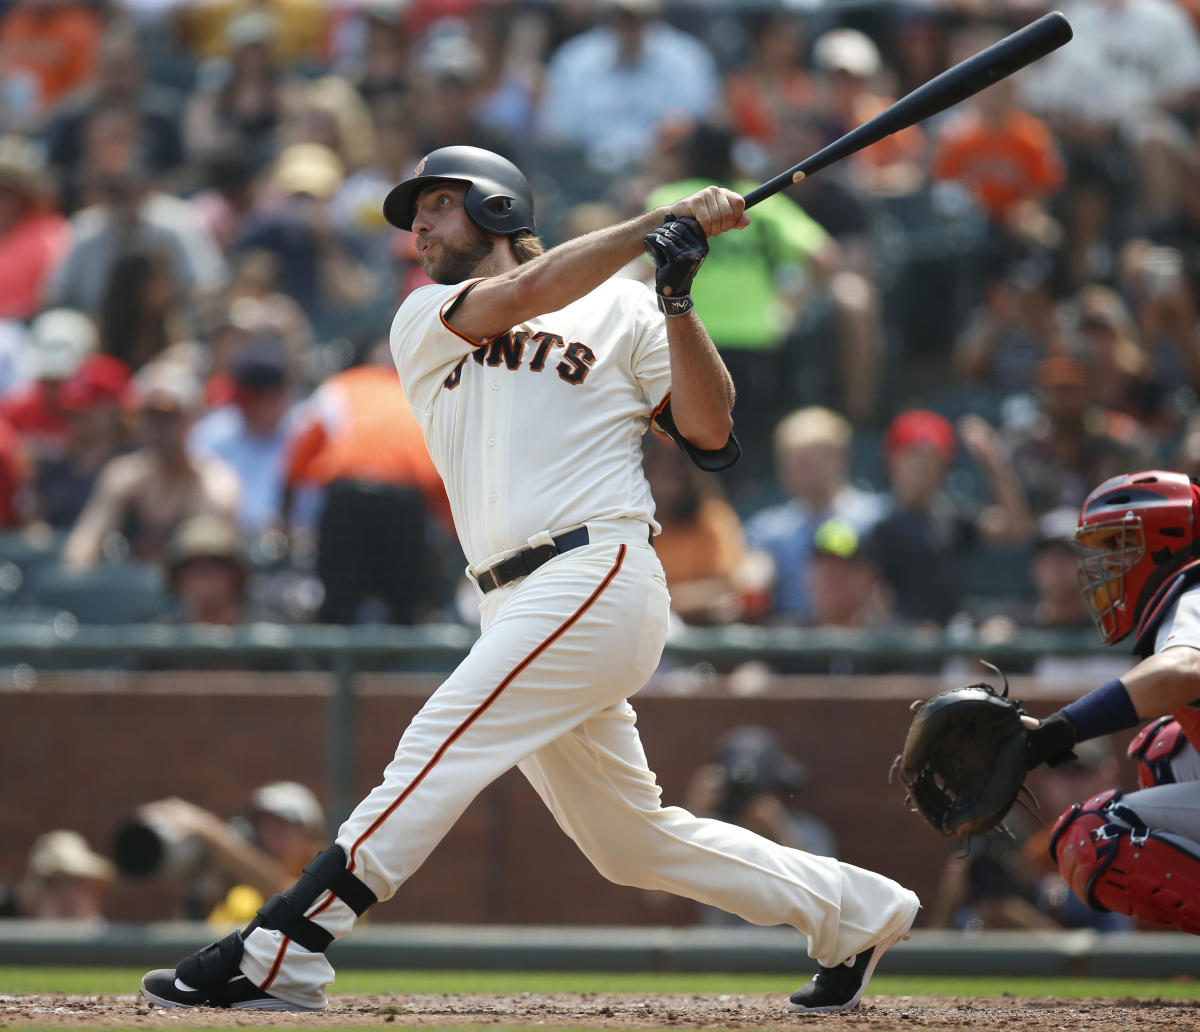 Giants' designated hitter options in 2020